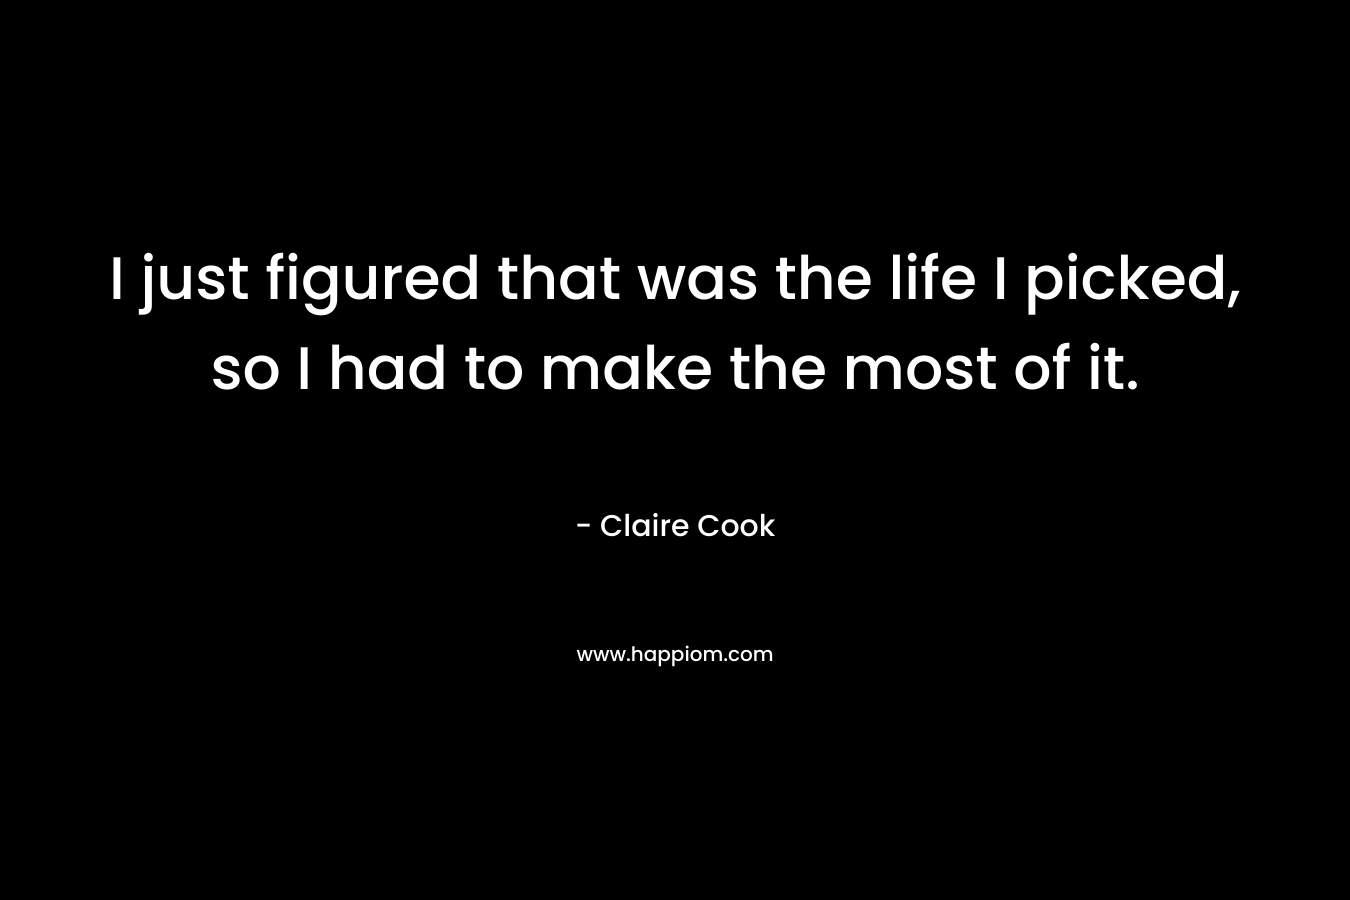 I just figured that was the life I picked, so I had to make the most of it. – Claire Cook